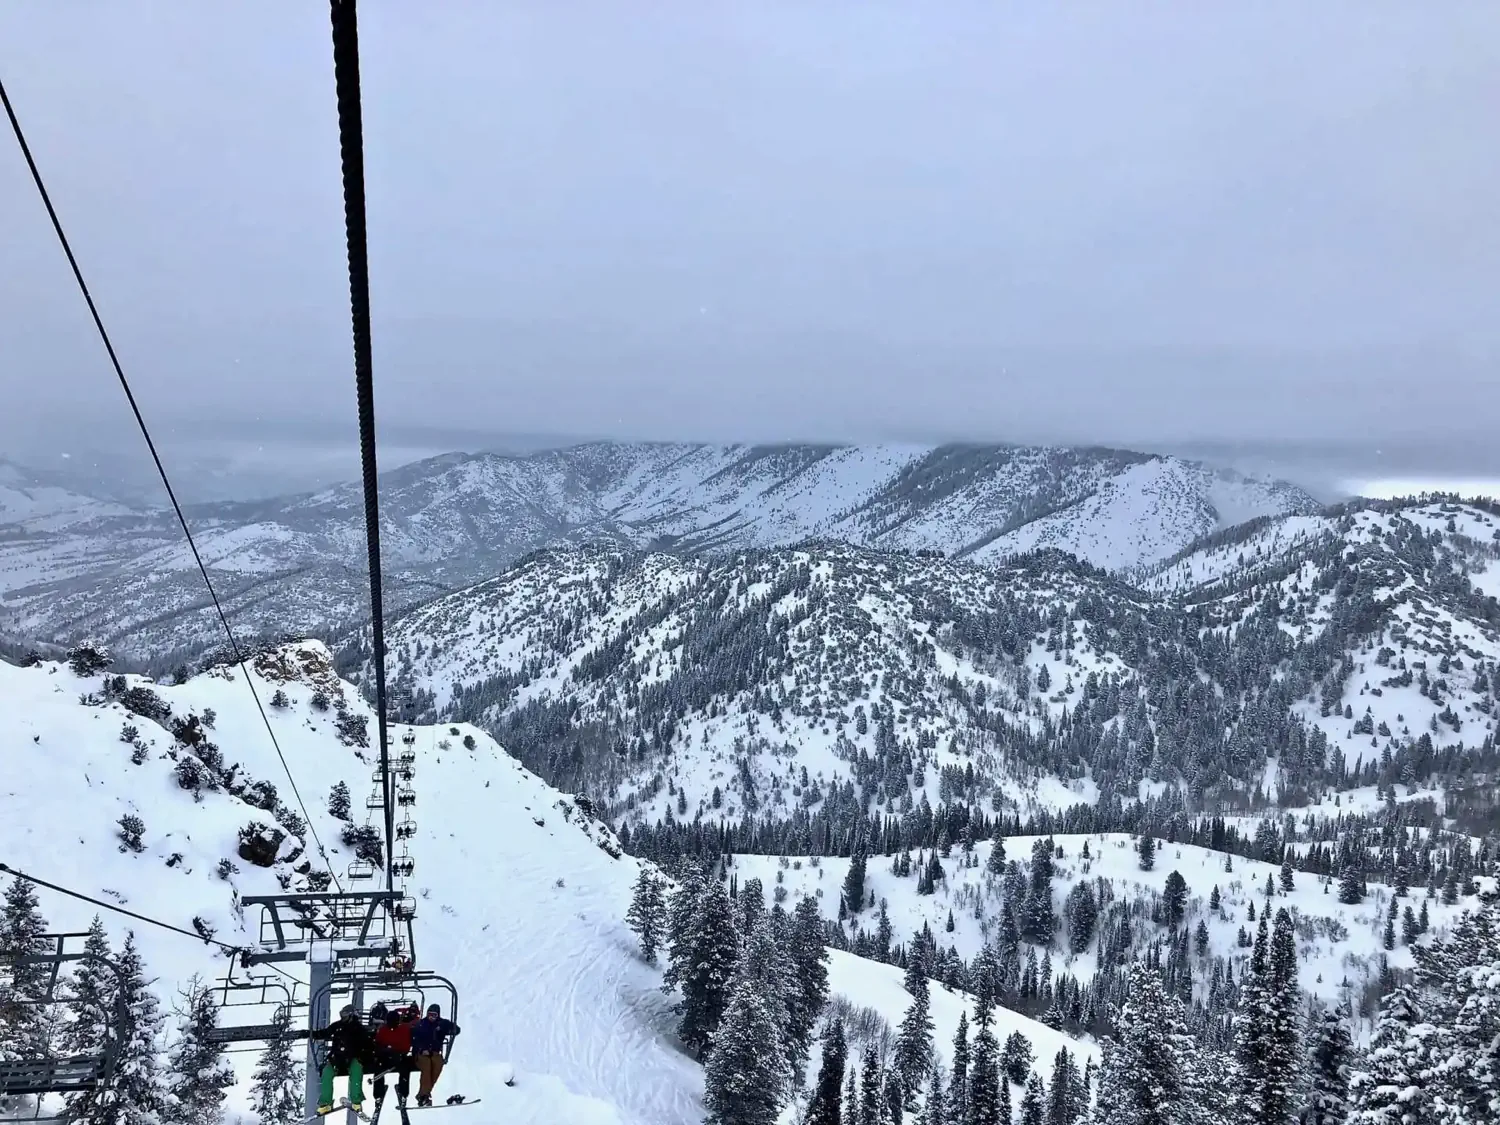 Scenic views as seen from the chairlift at Powder Mountain Ski Resort